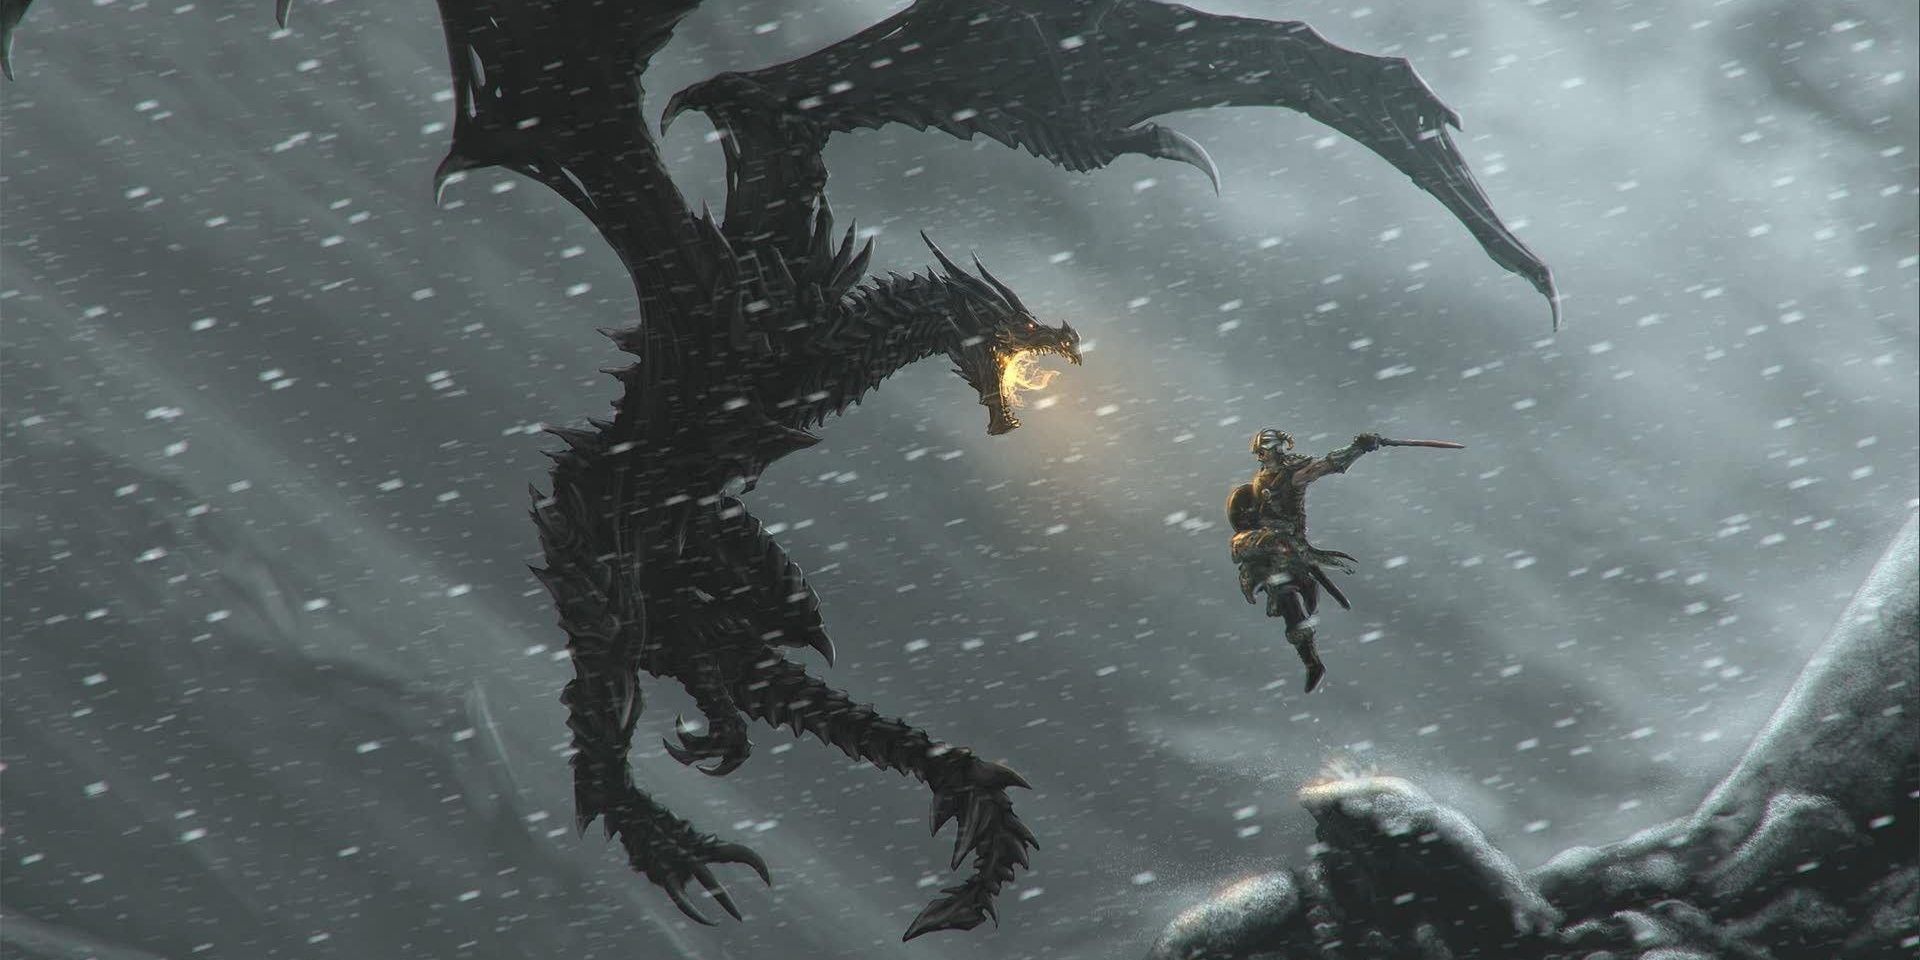 One of Skyrim's Nords fighting a Dragon in the snow.